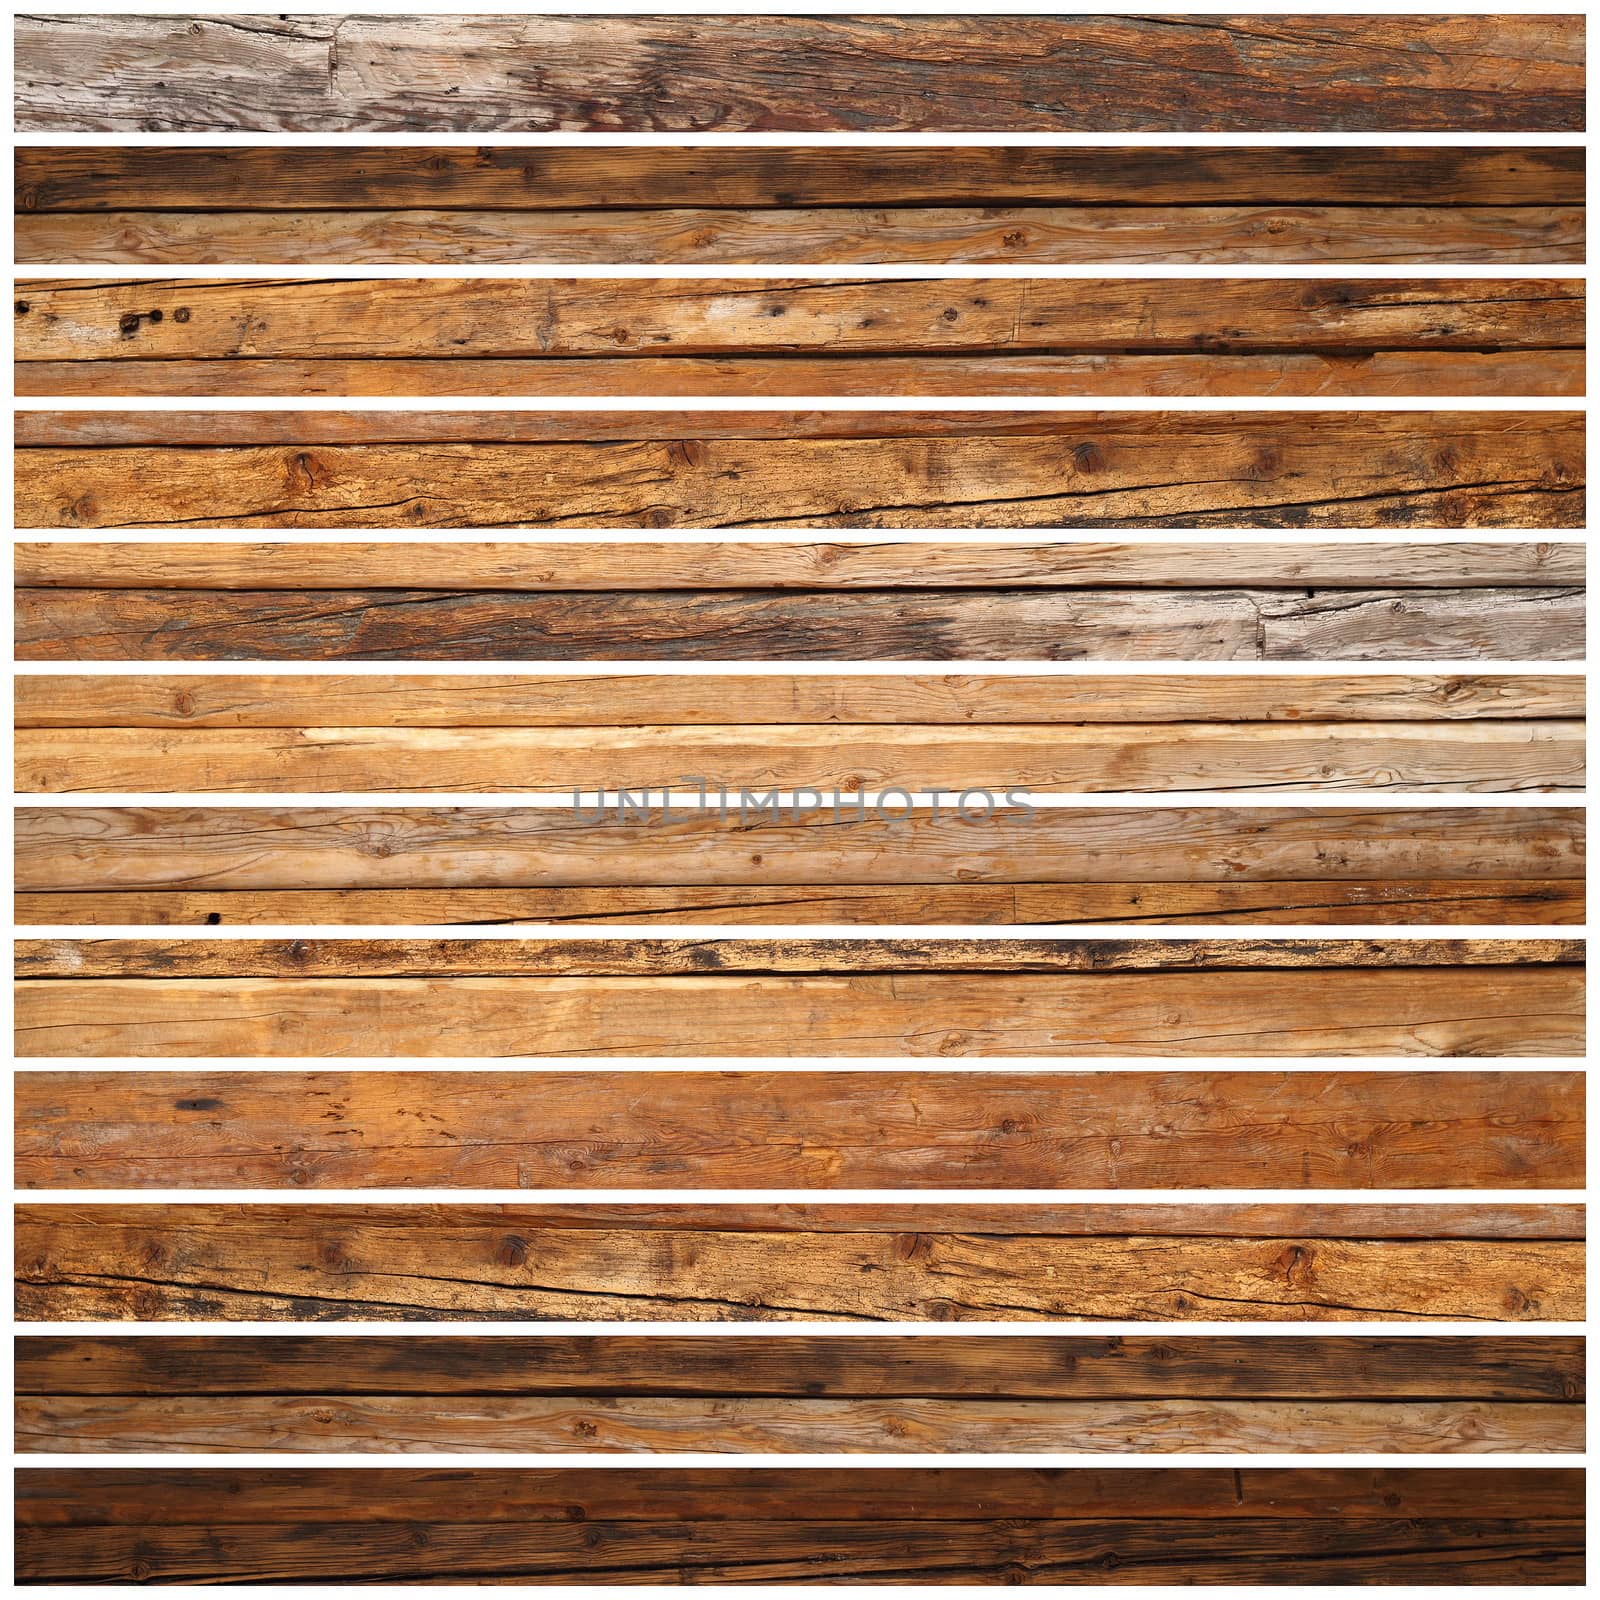 old beautiful wooden planks forming parquet design